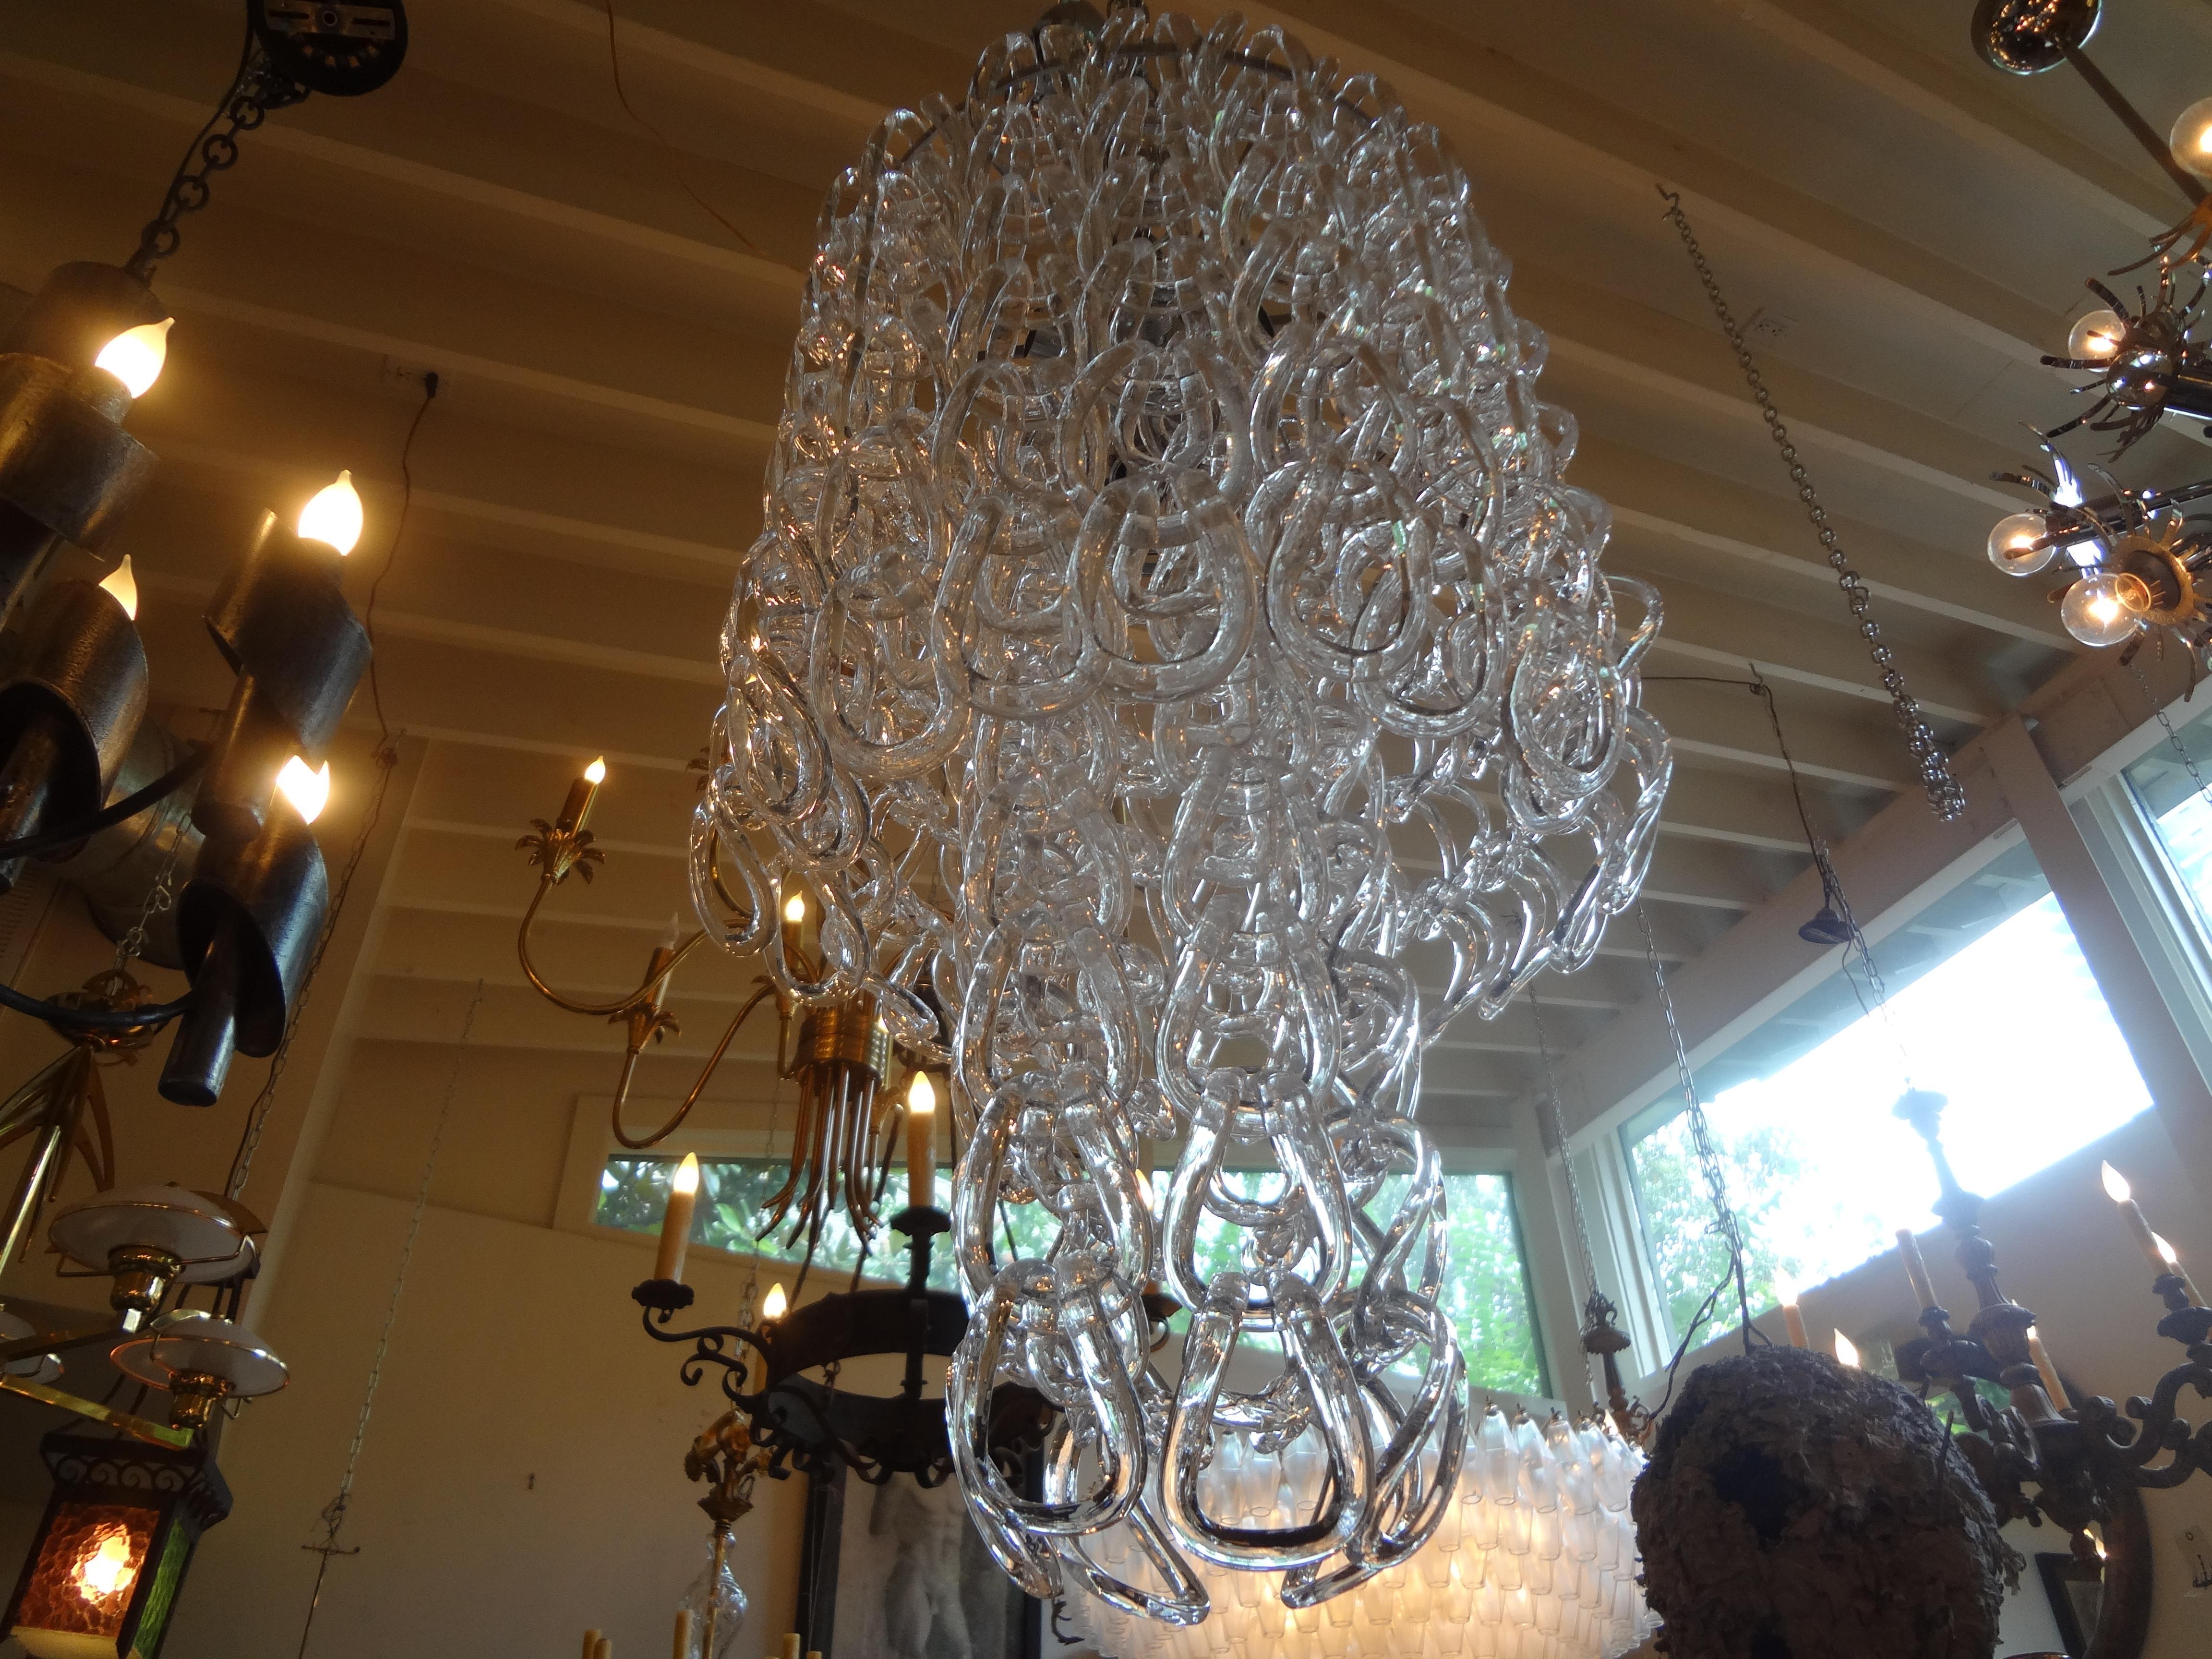 Murano chandelier, Mangiarotti inspired.
Interesting large Murano chandelier or Murano glass lantern inspired by Mangiarotti of Murano, Italy. This stunning Mid-Century Modern Murano glass chandelier has blown glass chain pendants creating a lovely